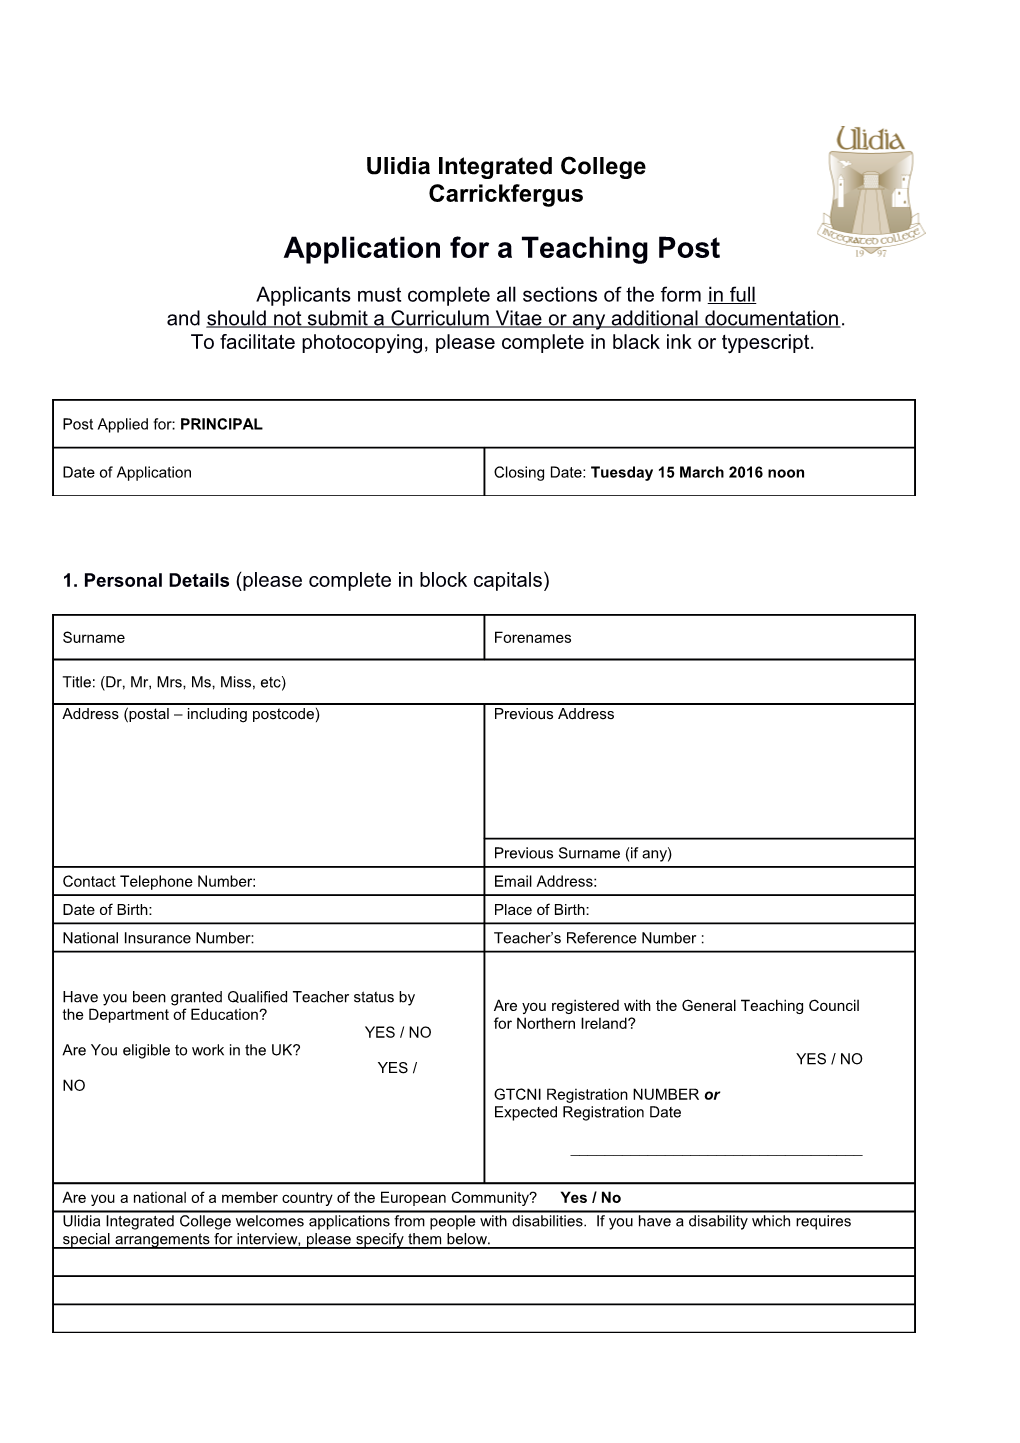 Application for a Teaching Post - THR 24